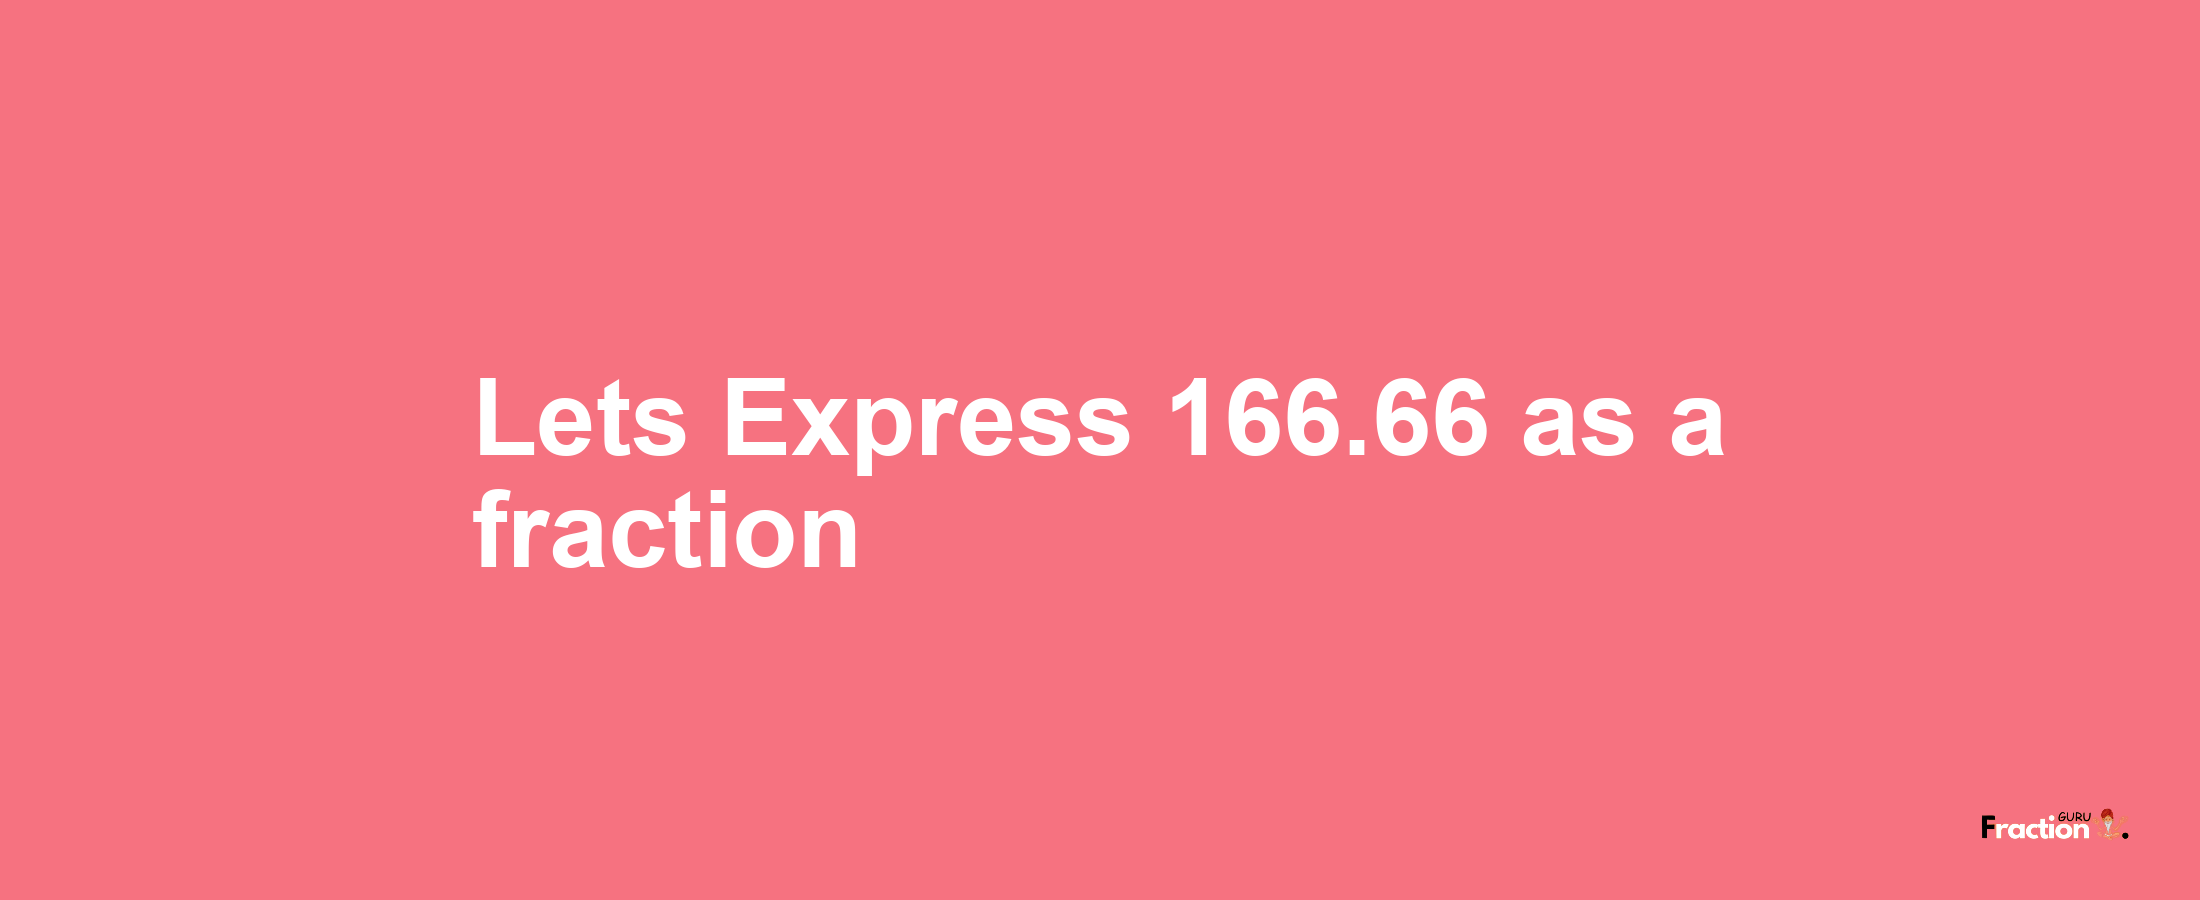 Lets Express 166.66 as afraction